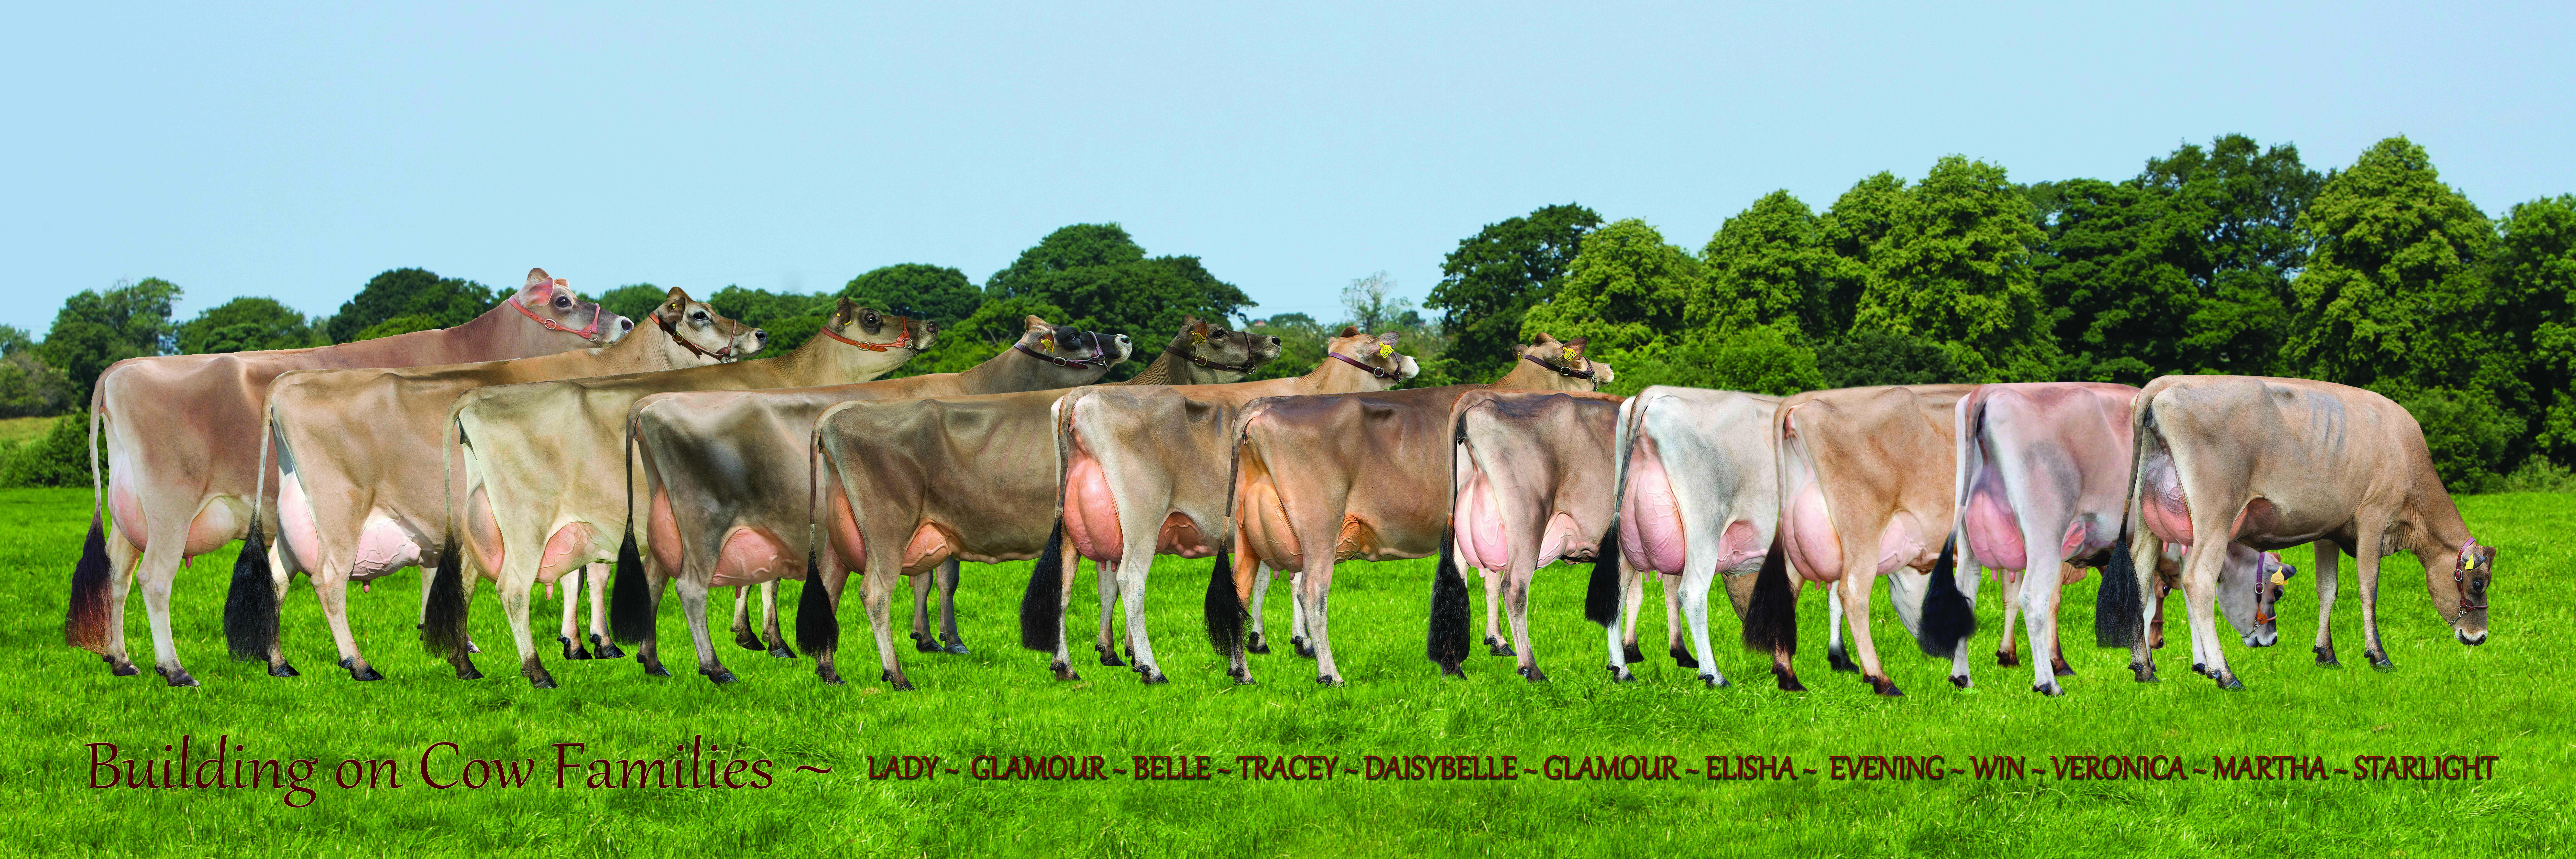 cow families banner